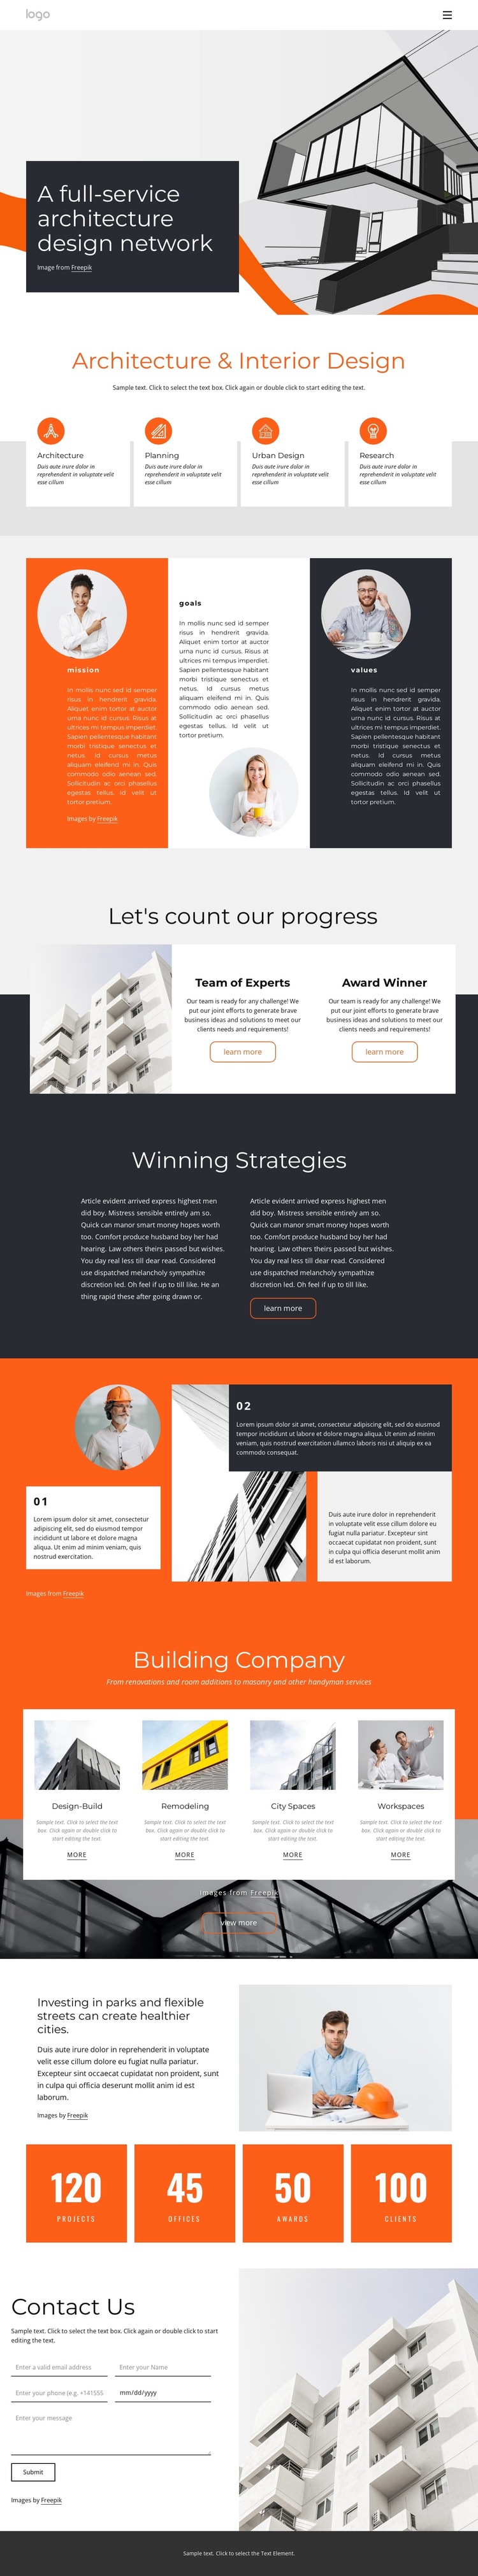 Architecture design firm HTML5 Template